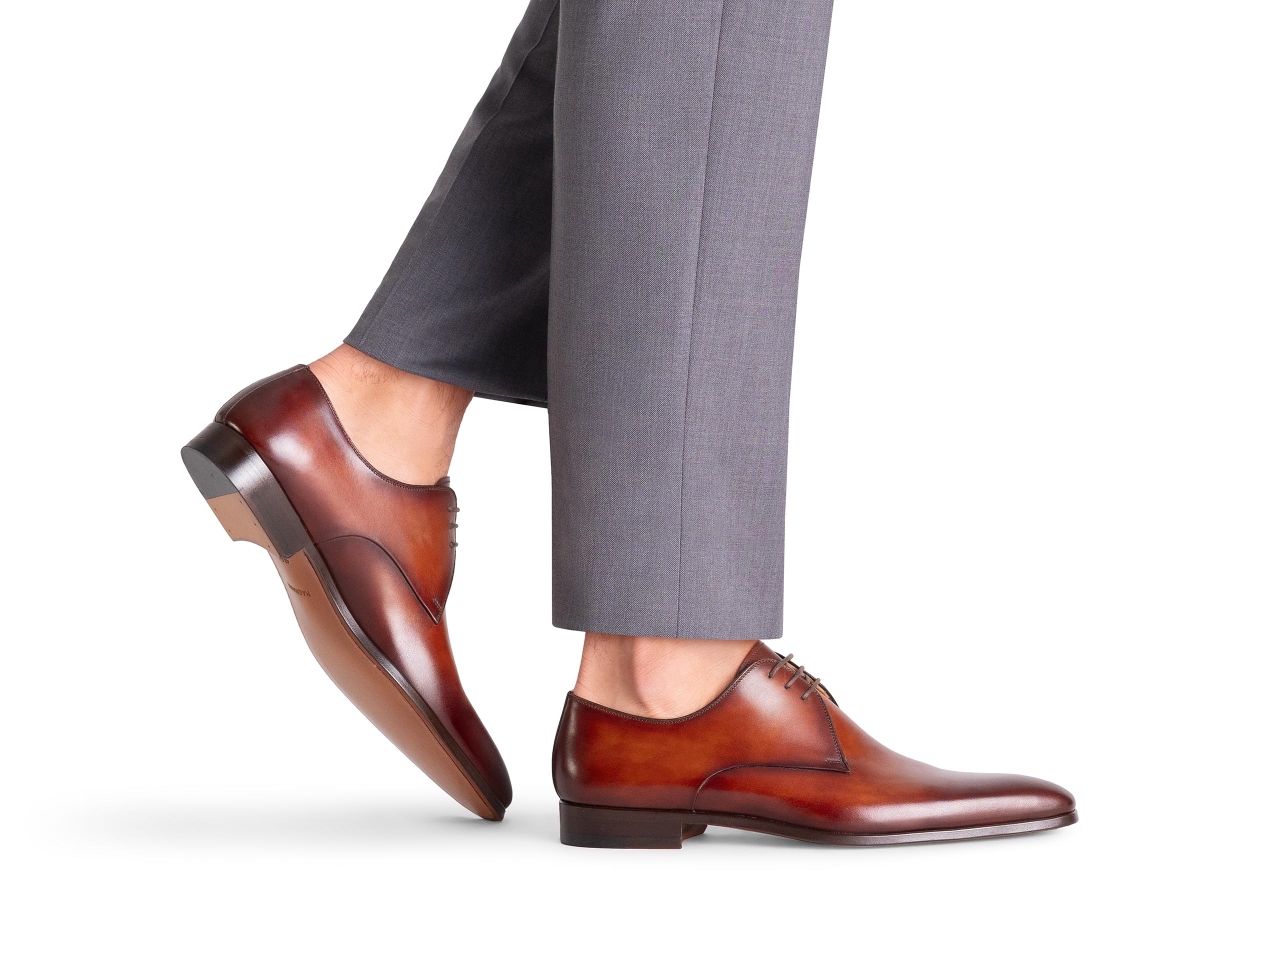 The Jacoby Cognac pairs well with light grey pants